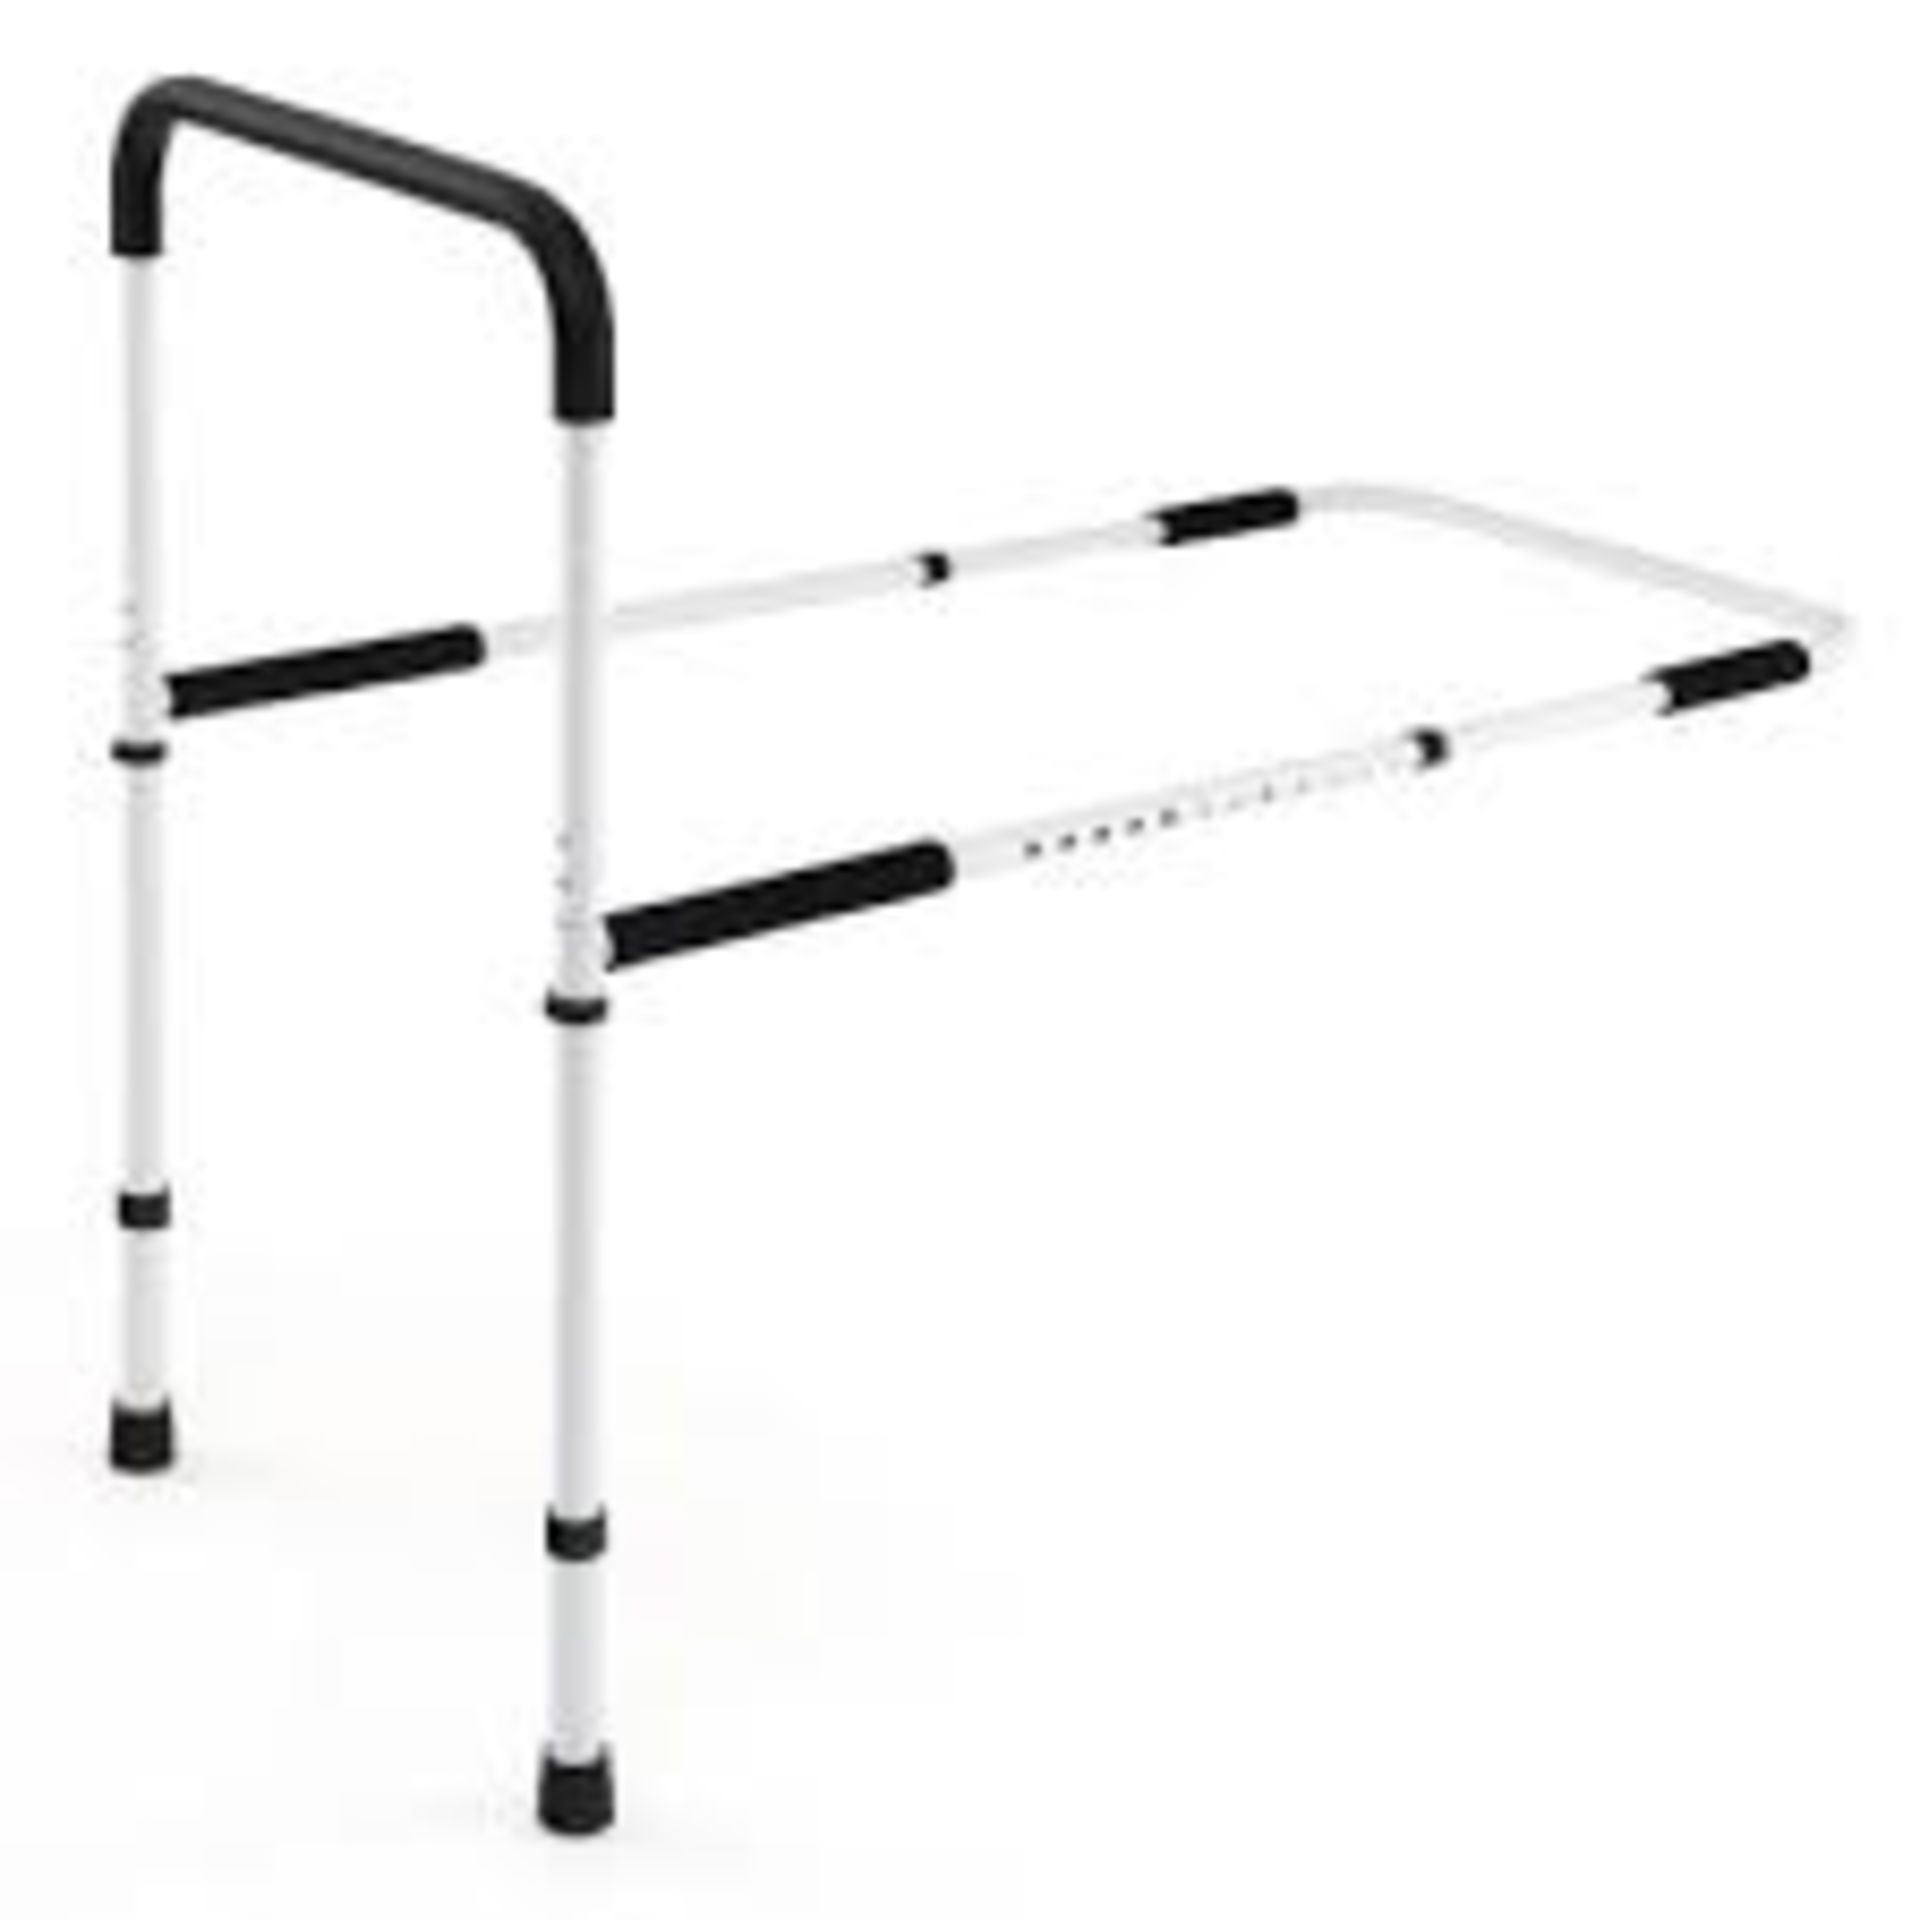 2 x Bed Assist Rail for Elderly, Handicap and Senior. - R13a.7.